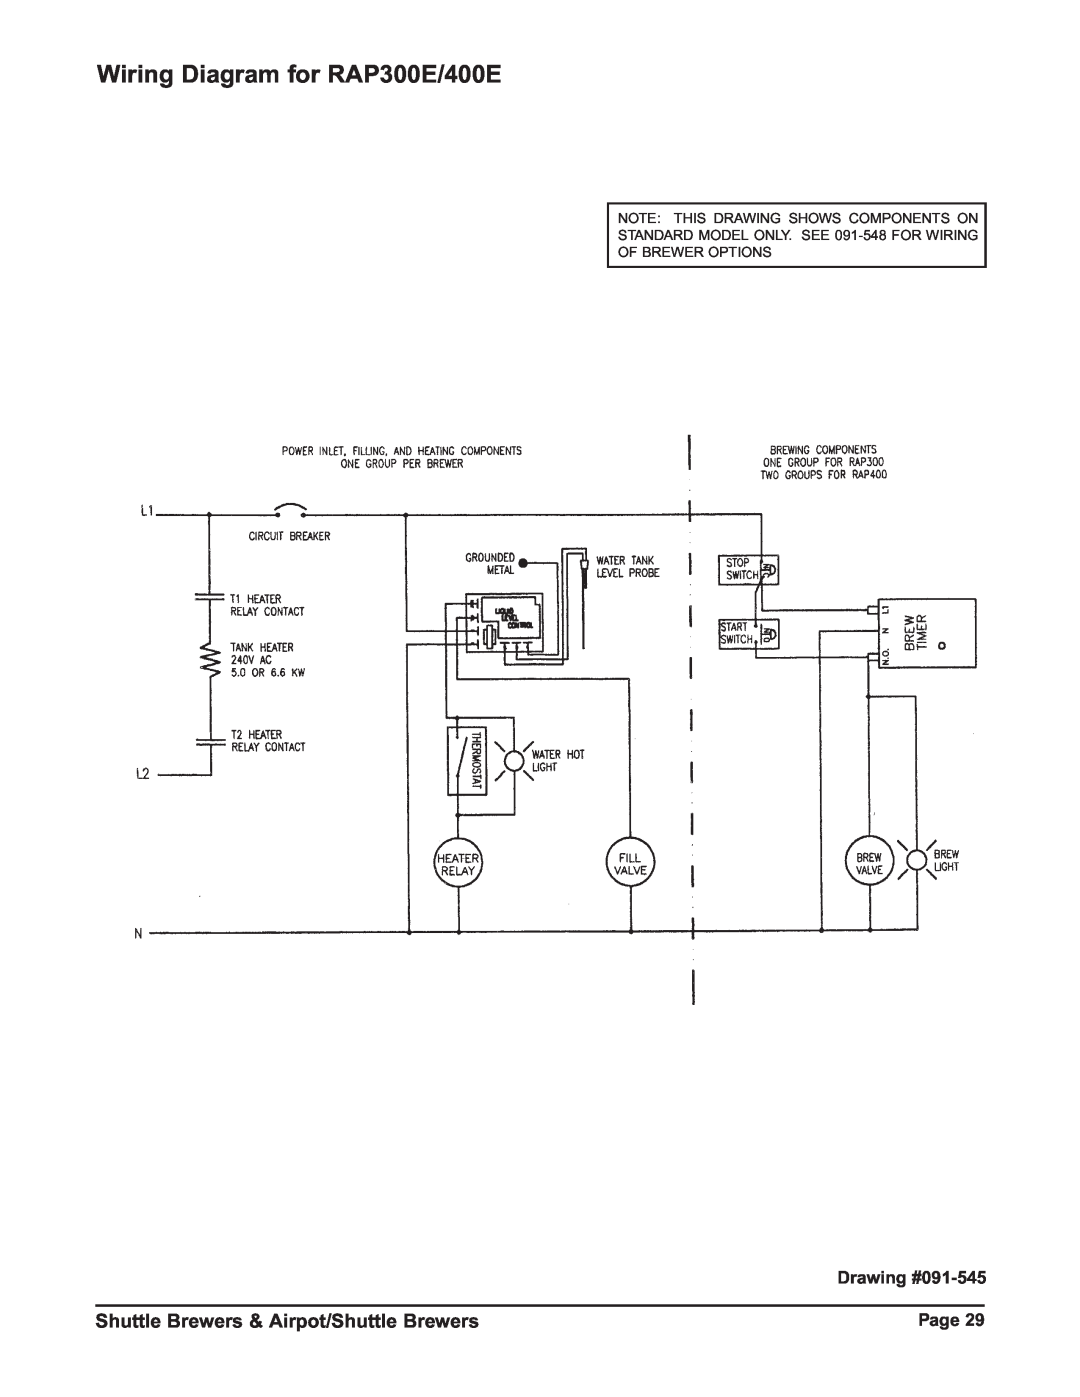 Grindmaster RAPS300E Wiring Diagram for RAP300E/400E, Shuttle Brewers & Airpot/Shuttle Brewers, Drawing #091-545, Page 